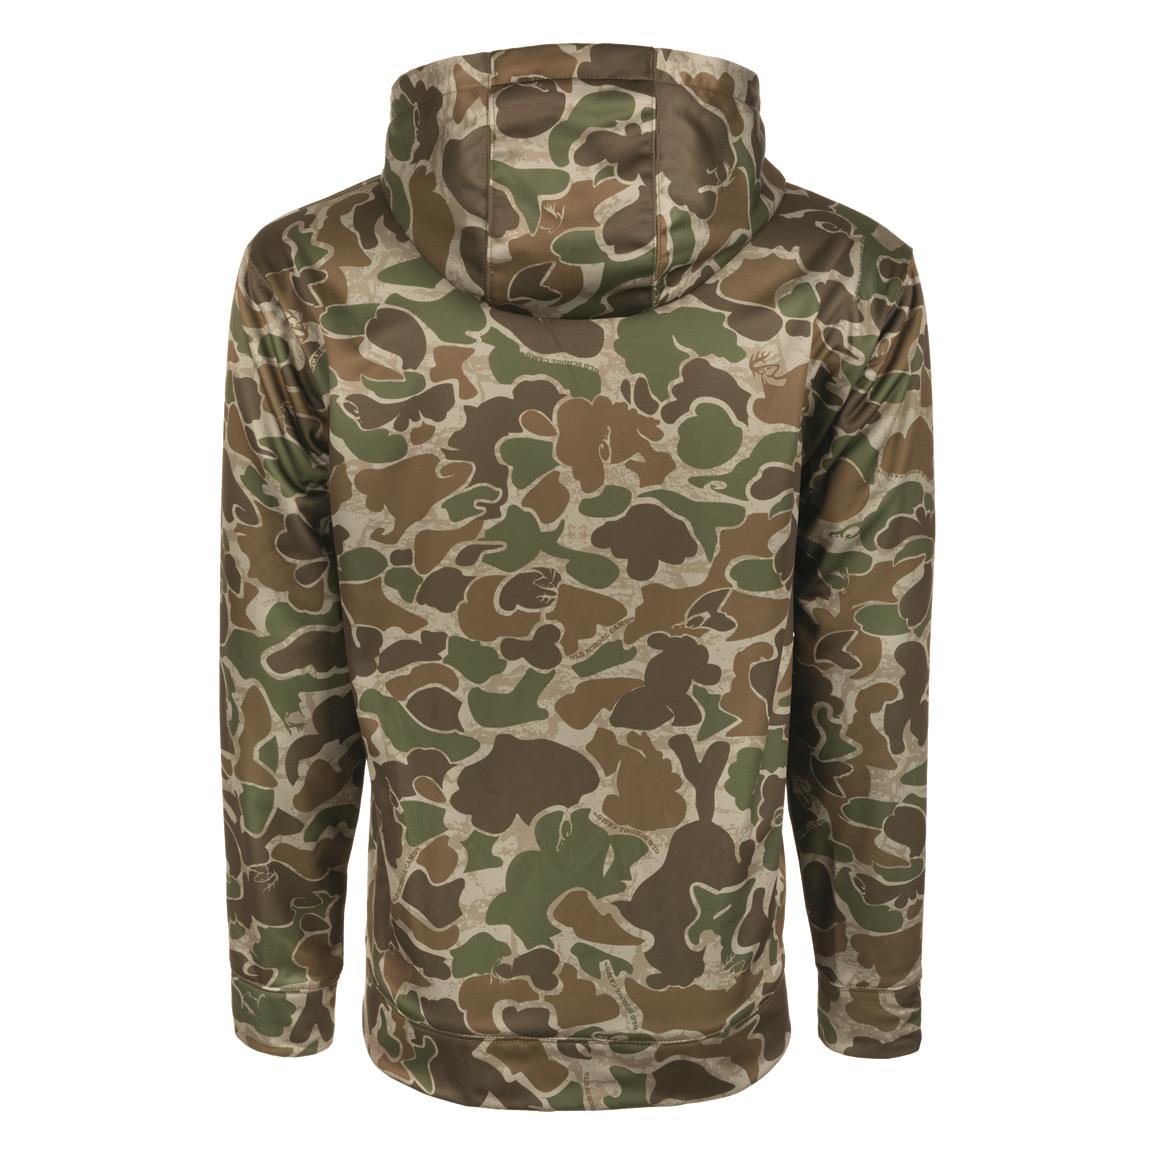 Simms Kid's Bugstopper Hoodie - 730439, Shirts at Sportsman's Guide